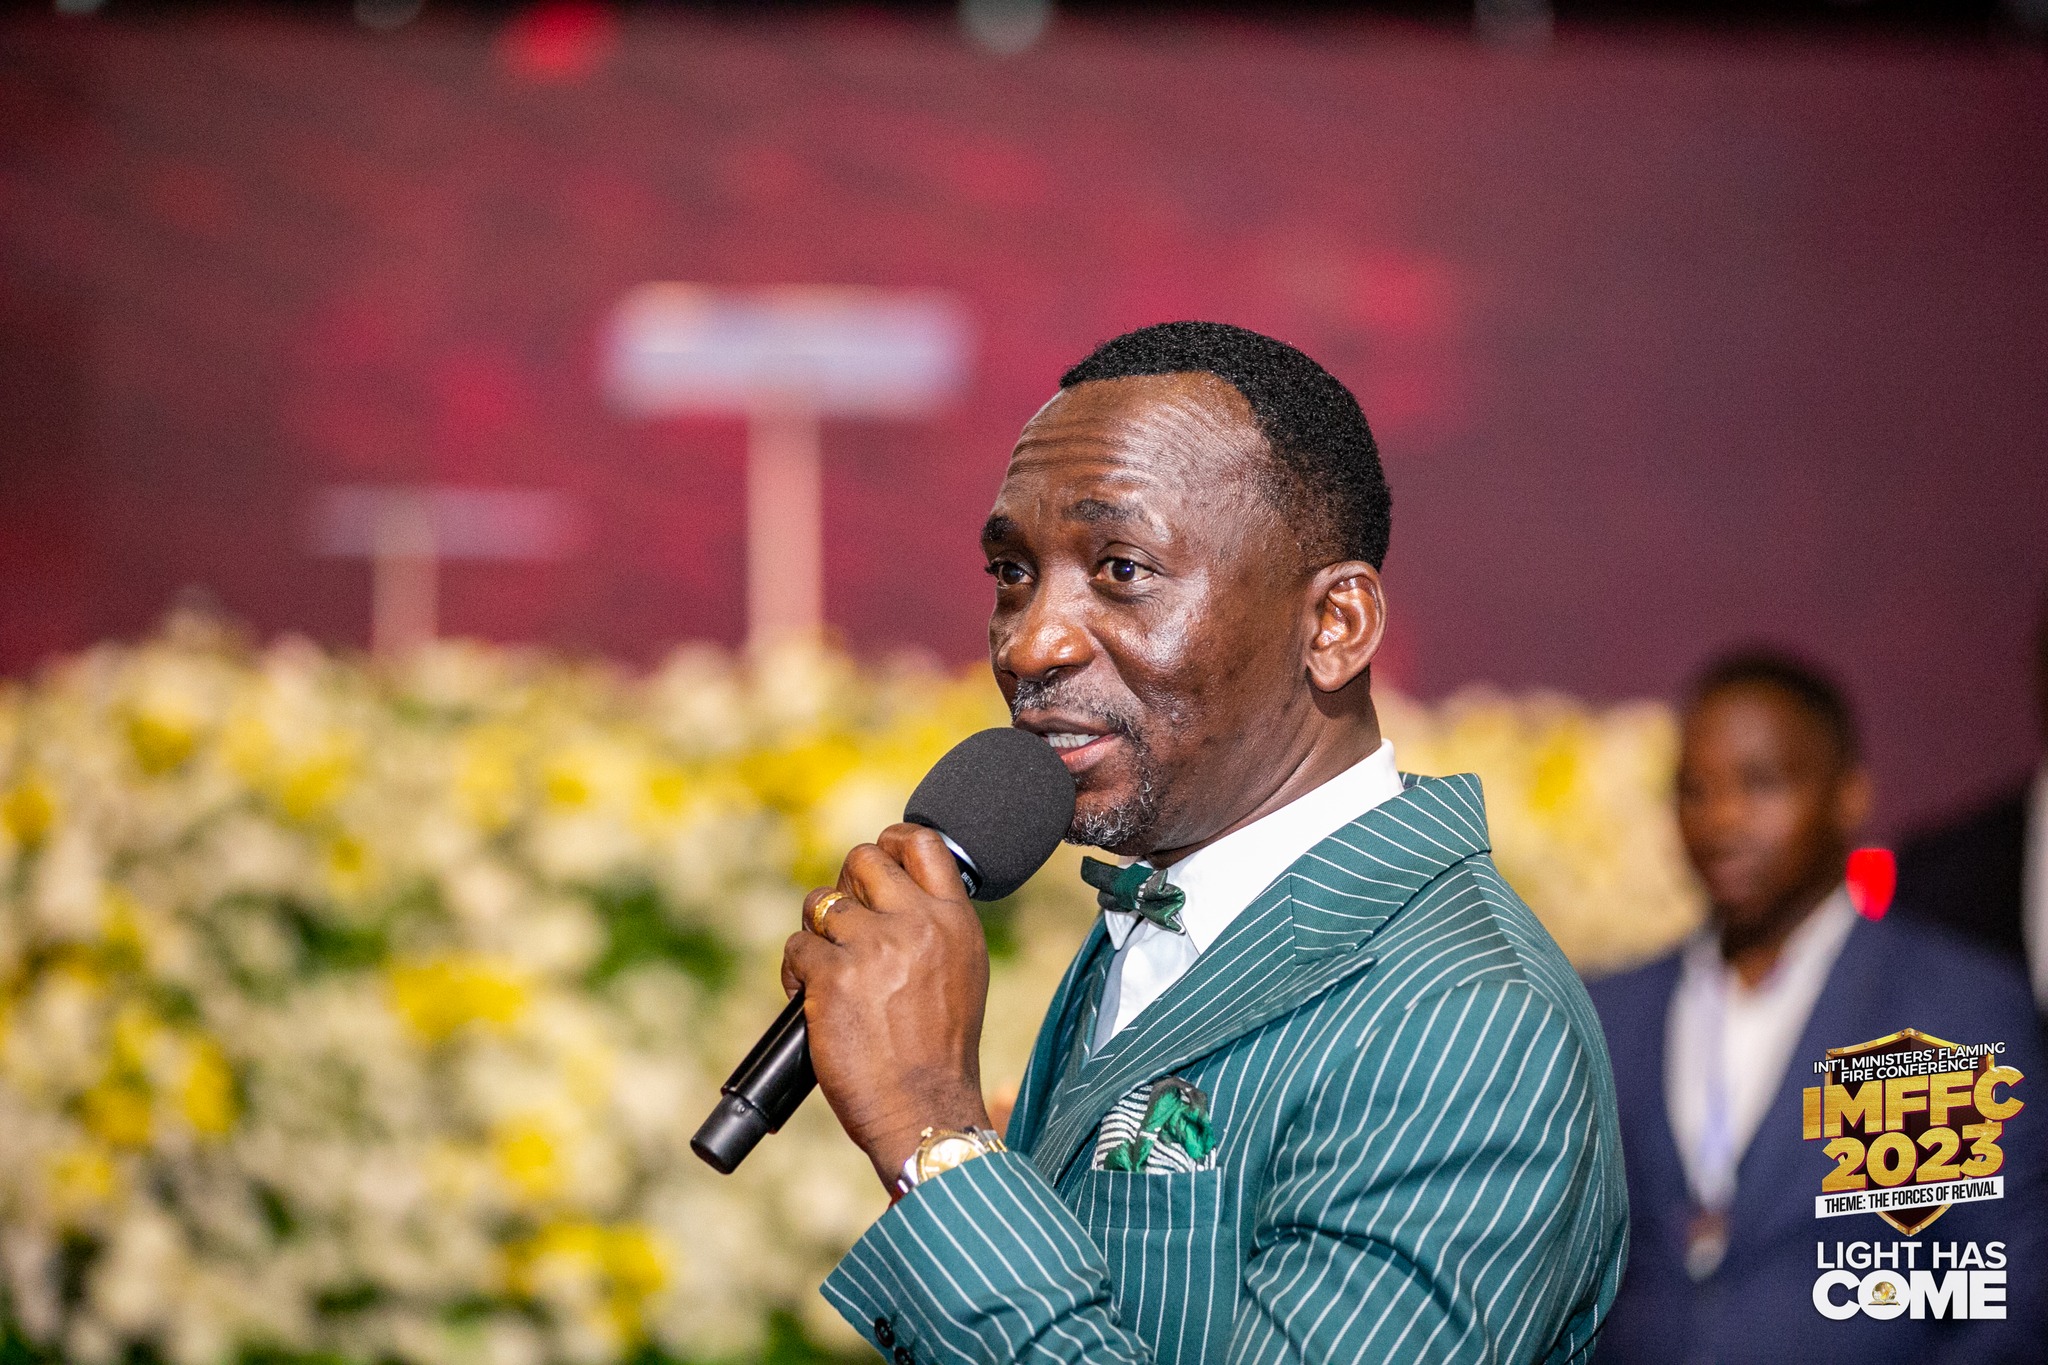 Marital Harmony For Revival mp3 By Dr. Paul Enenche